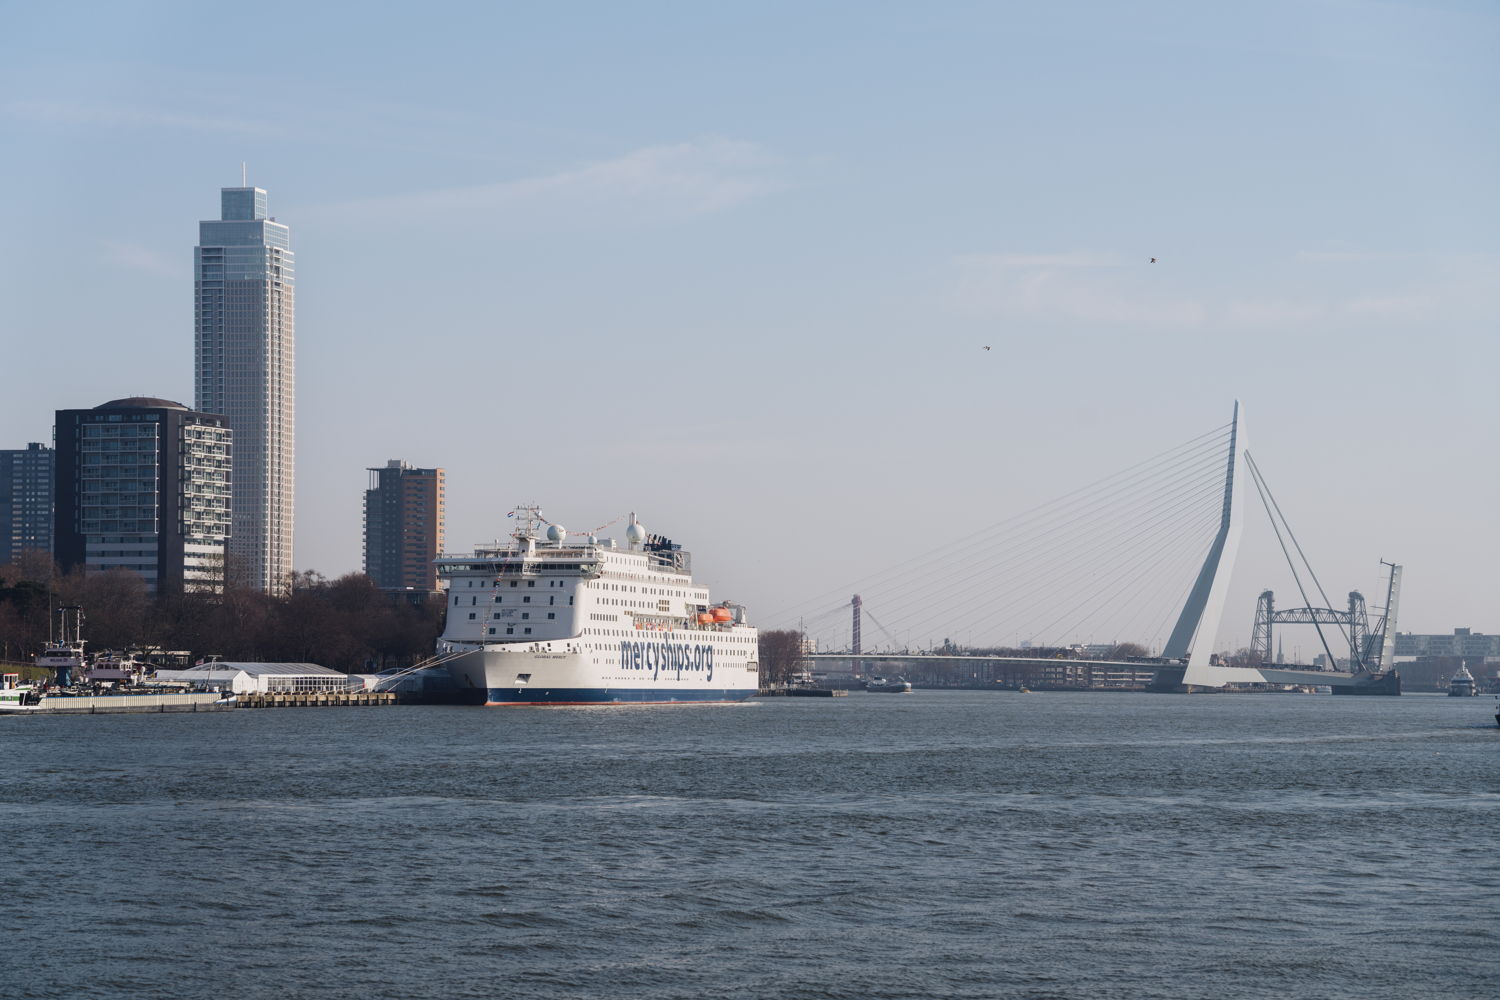 The Global Mercy docked at the port of Rotterdam for two weeks of public tours